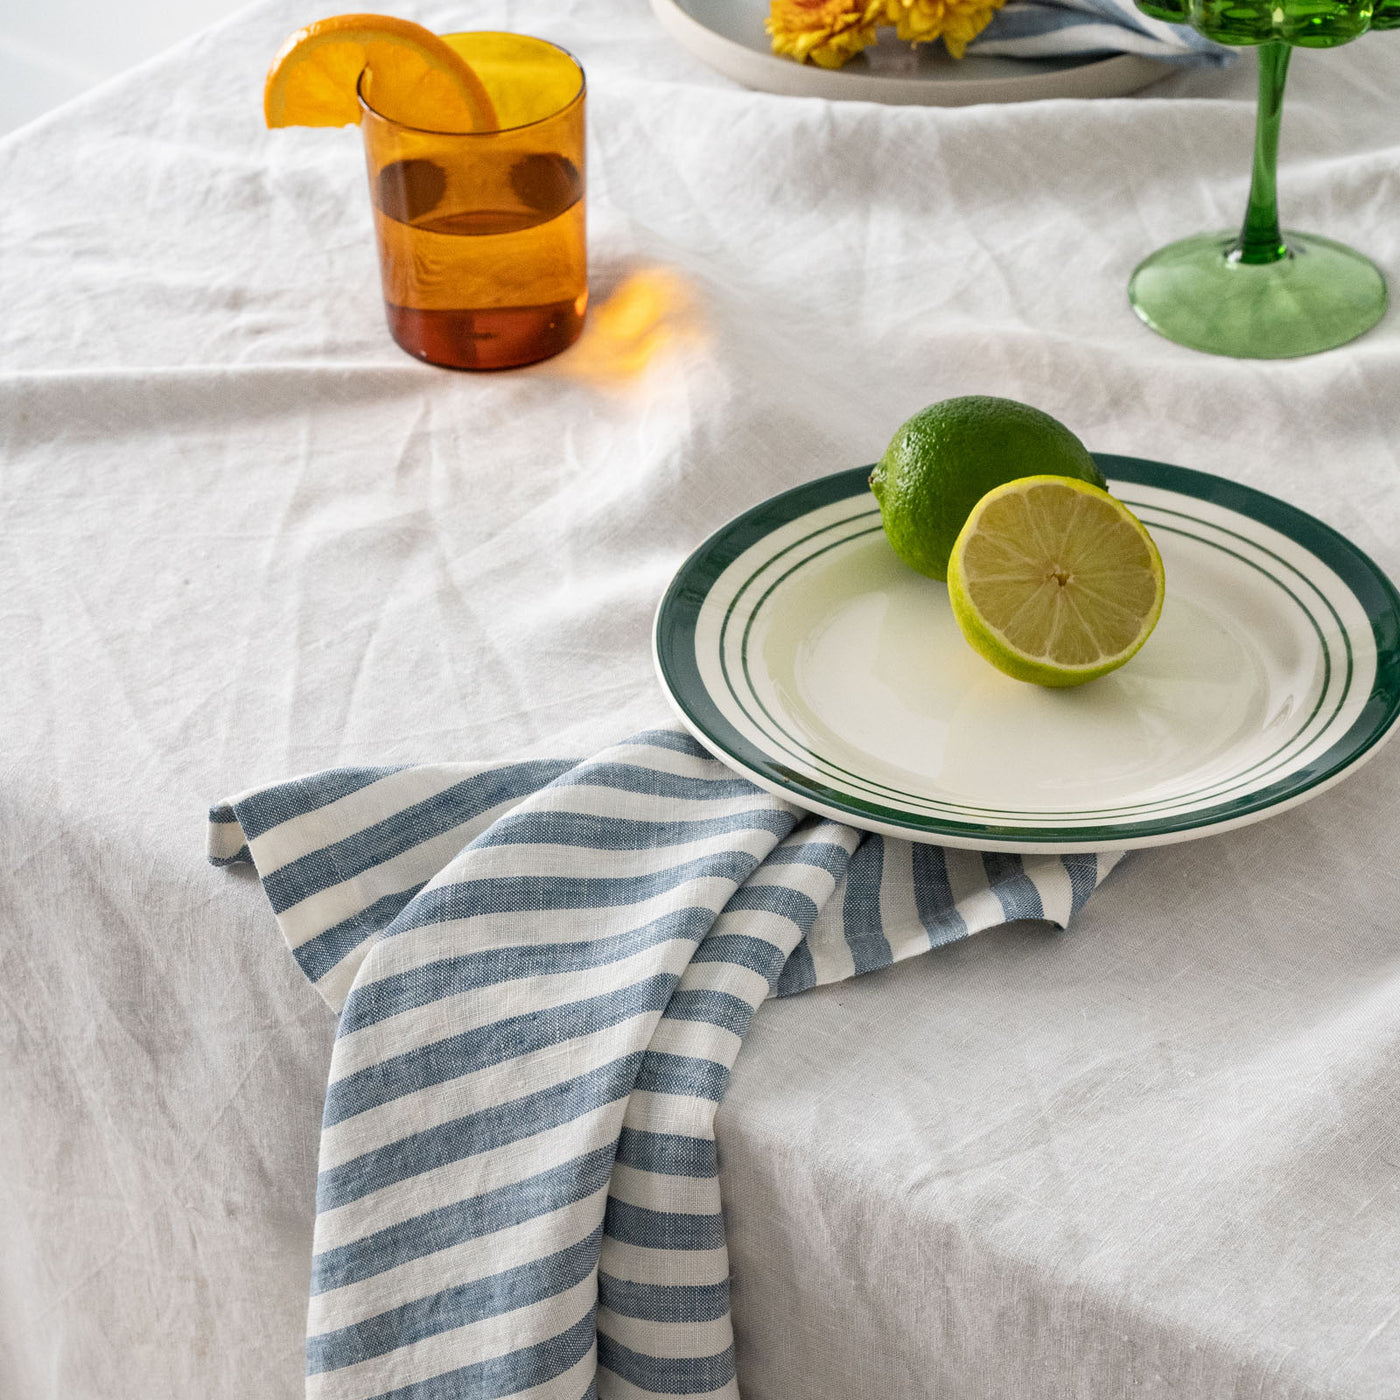 French Flax Linen Napkins (Set Of 4) in Marine Blue Stripe